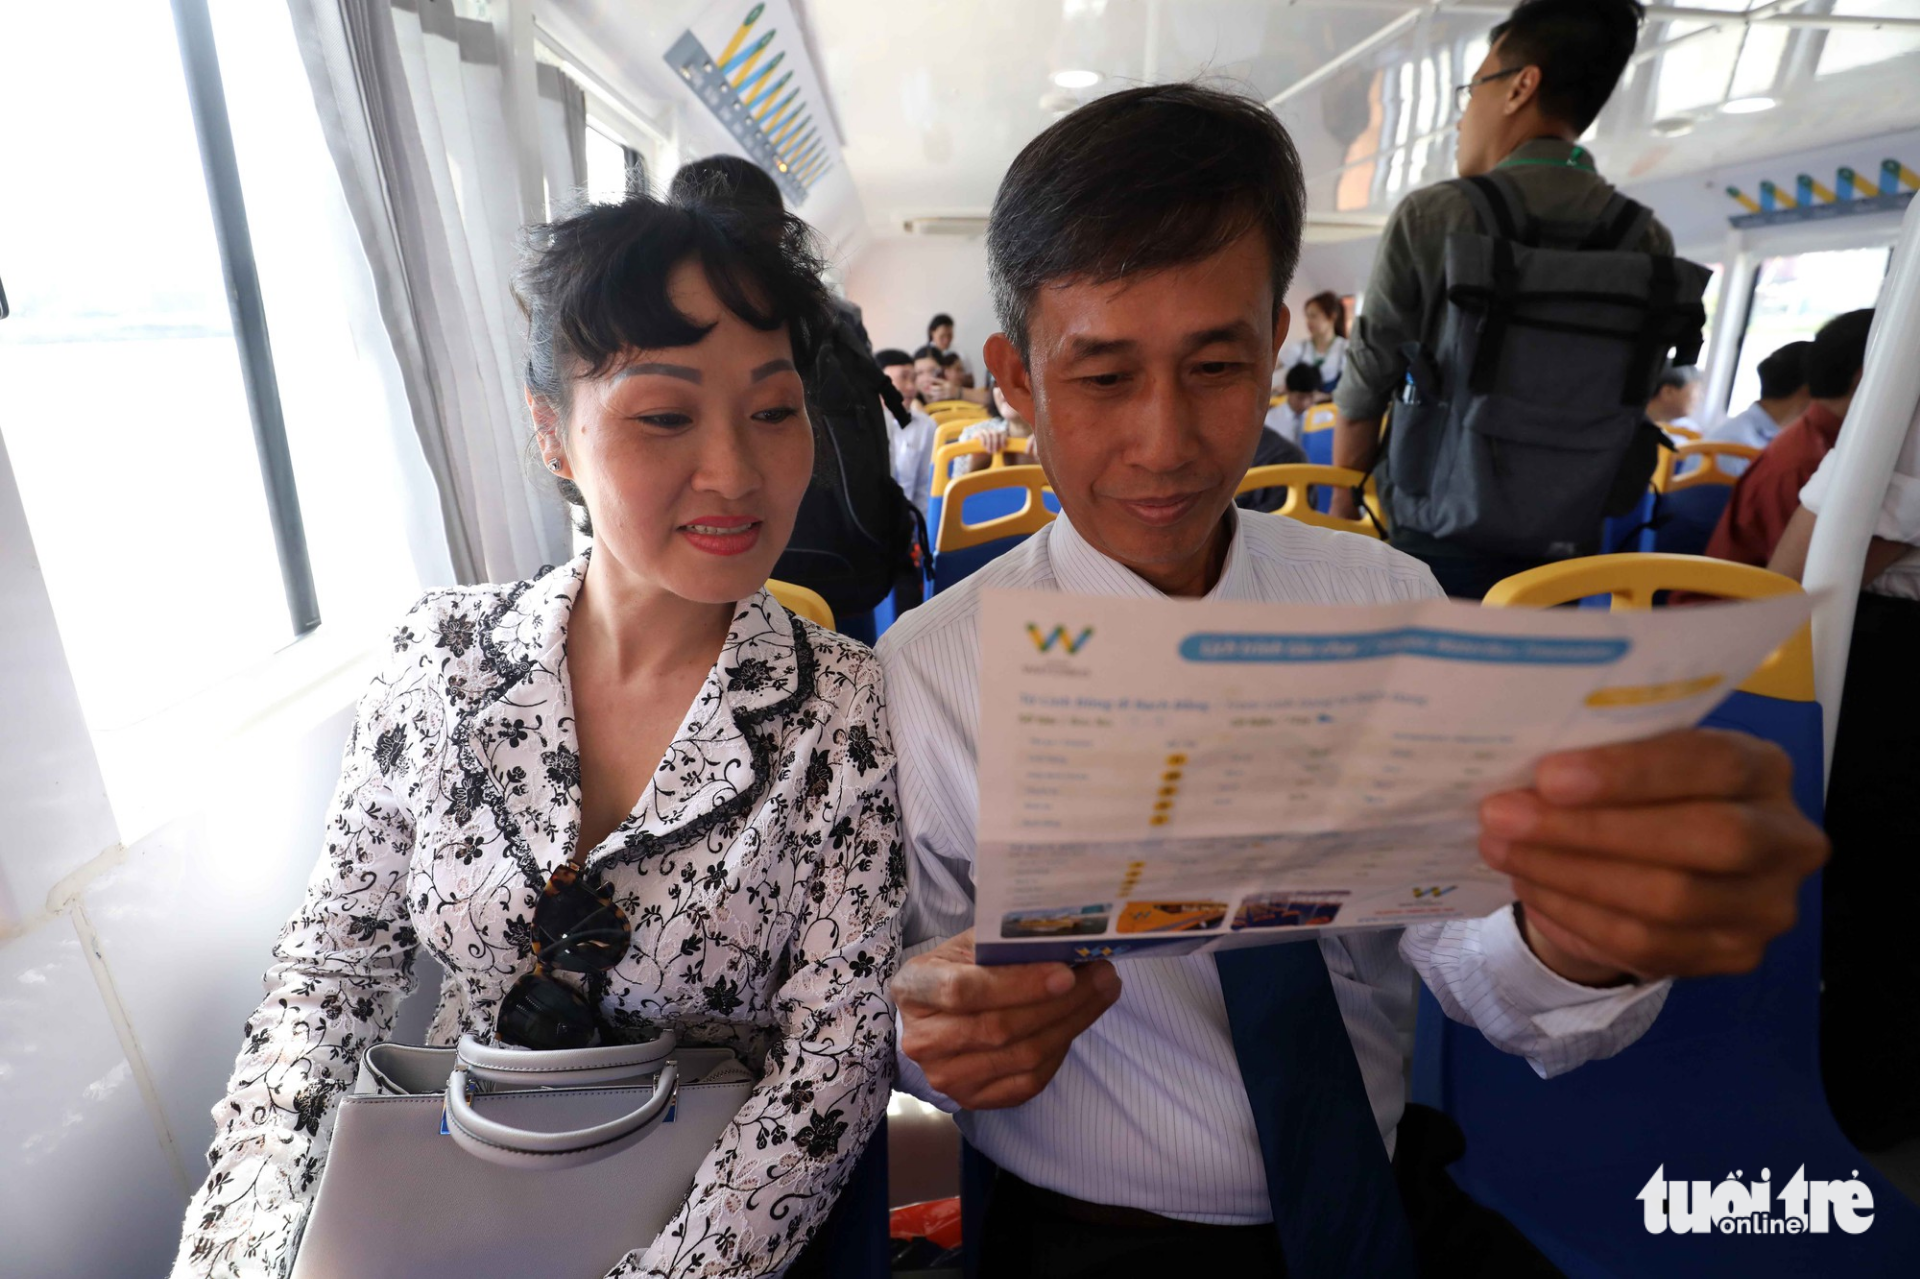 Passengers read the instructions on the river bus.